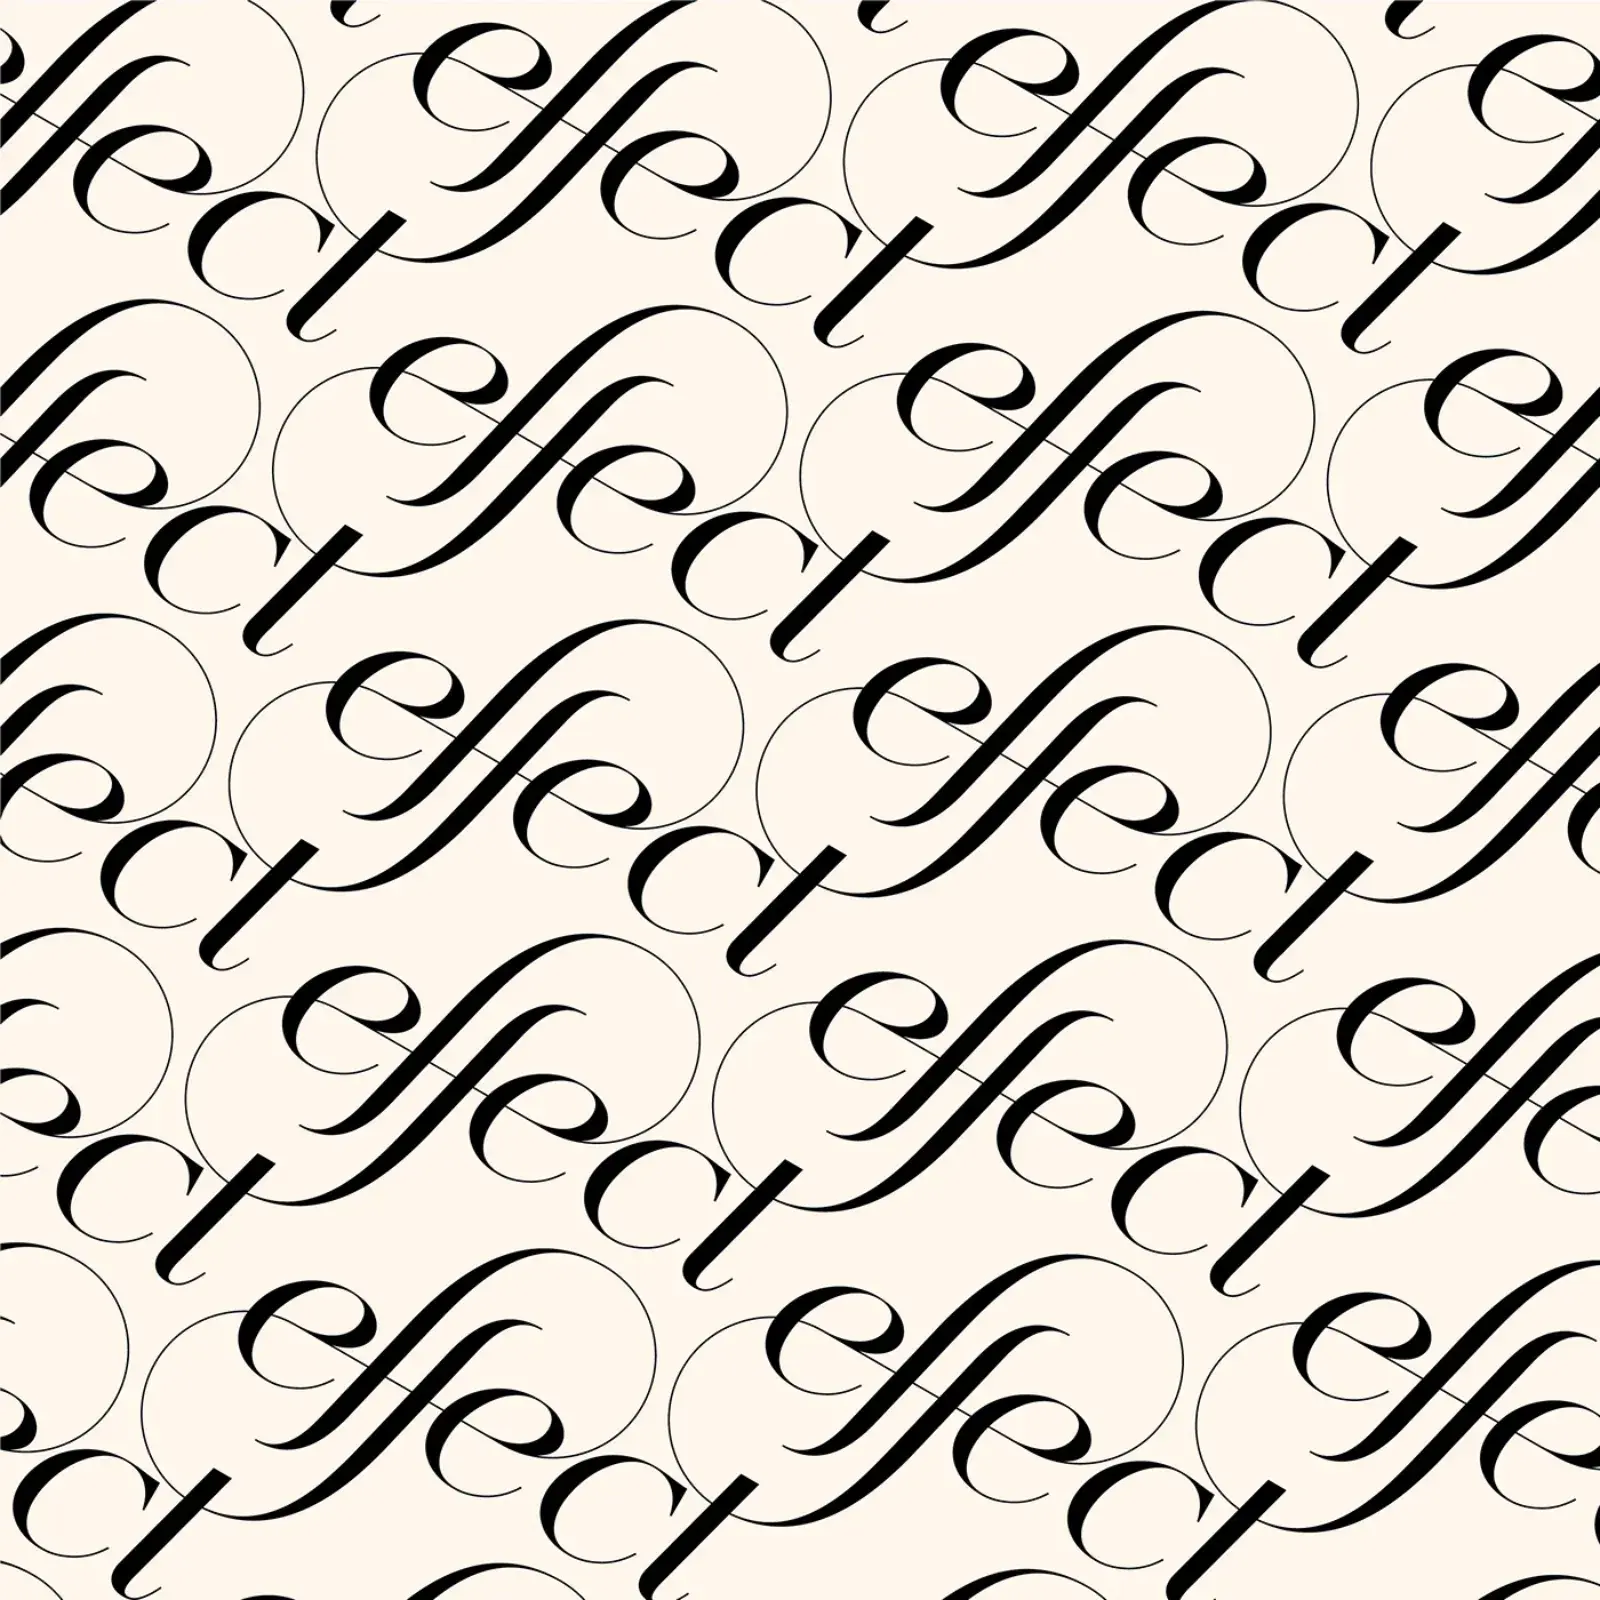 Letters and ligatures creating intricate logo designs